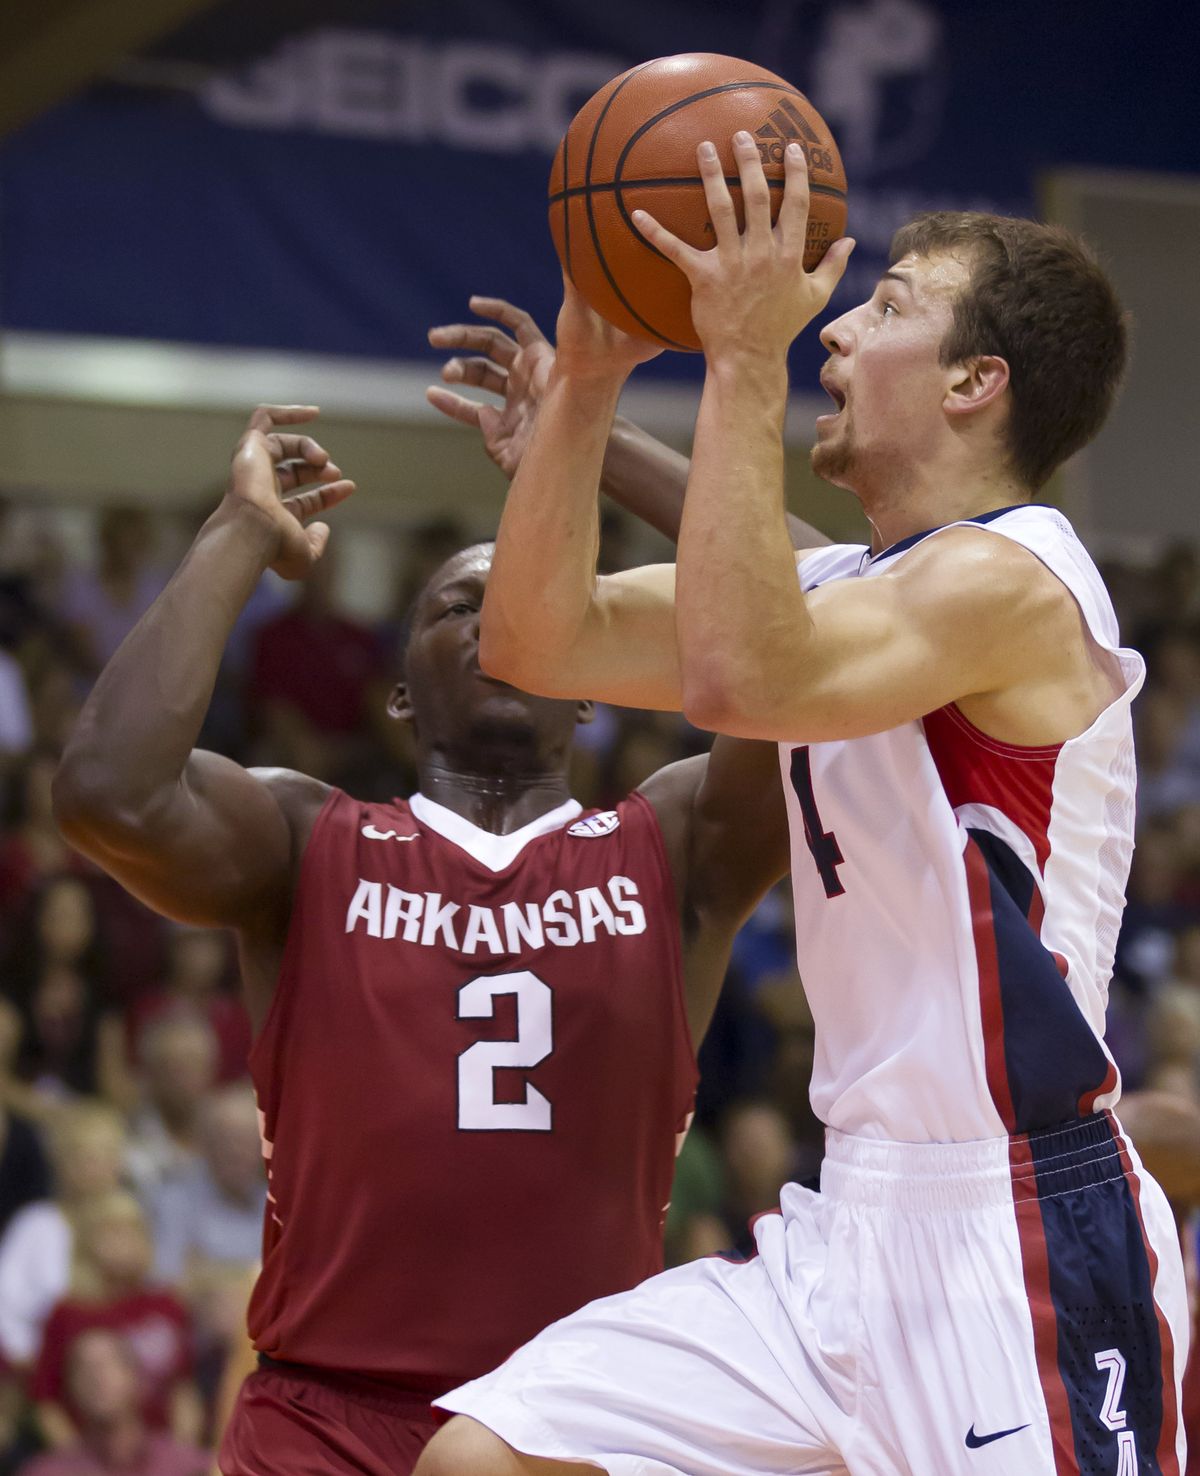 Zags’ Kevin Pangos looks to score against Alandise Harris. (Associated Press)